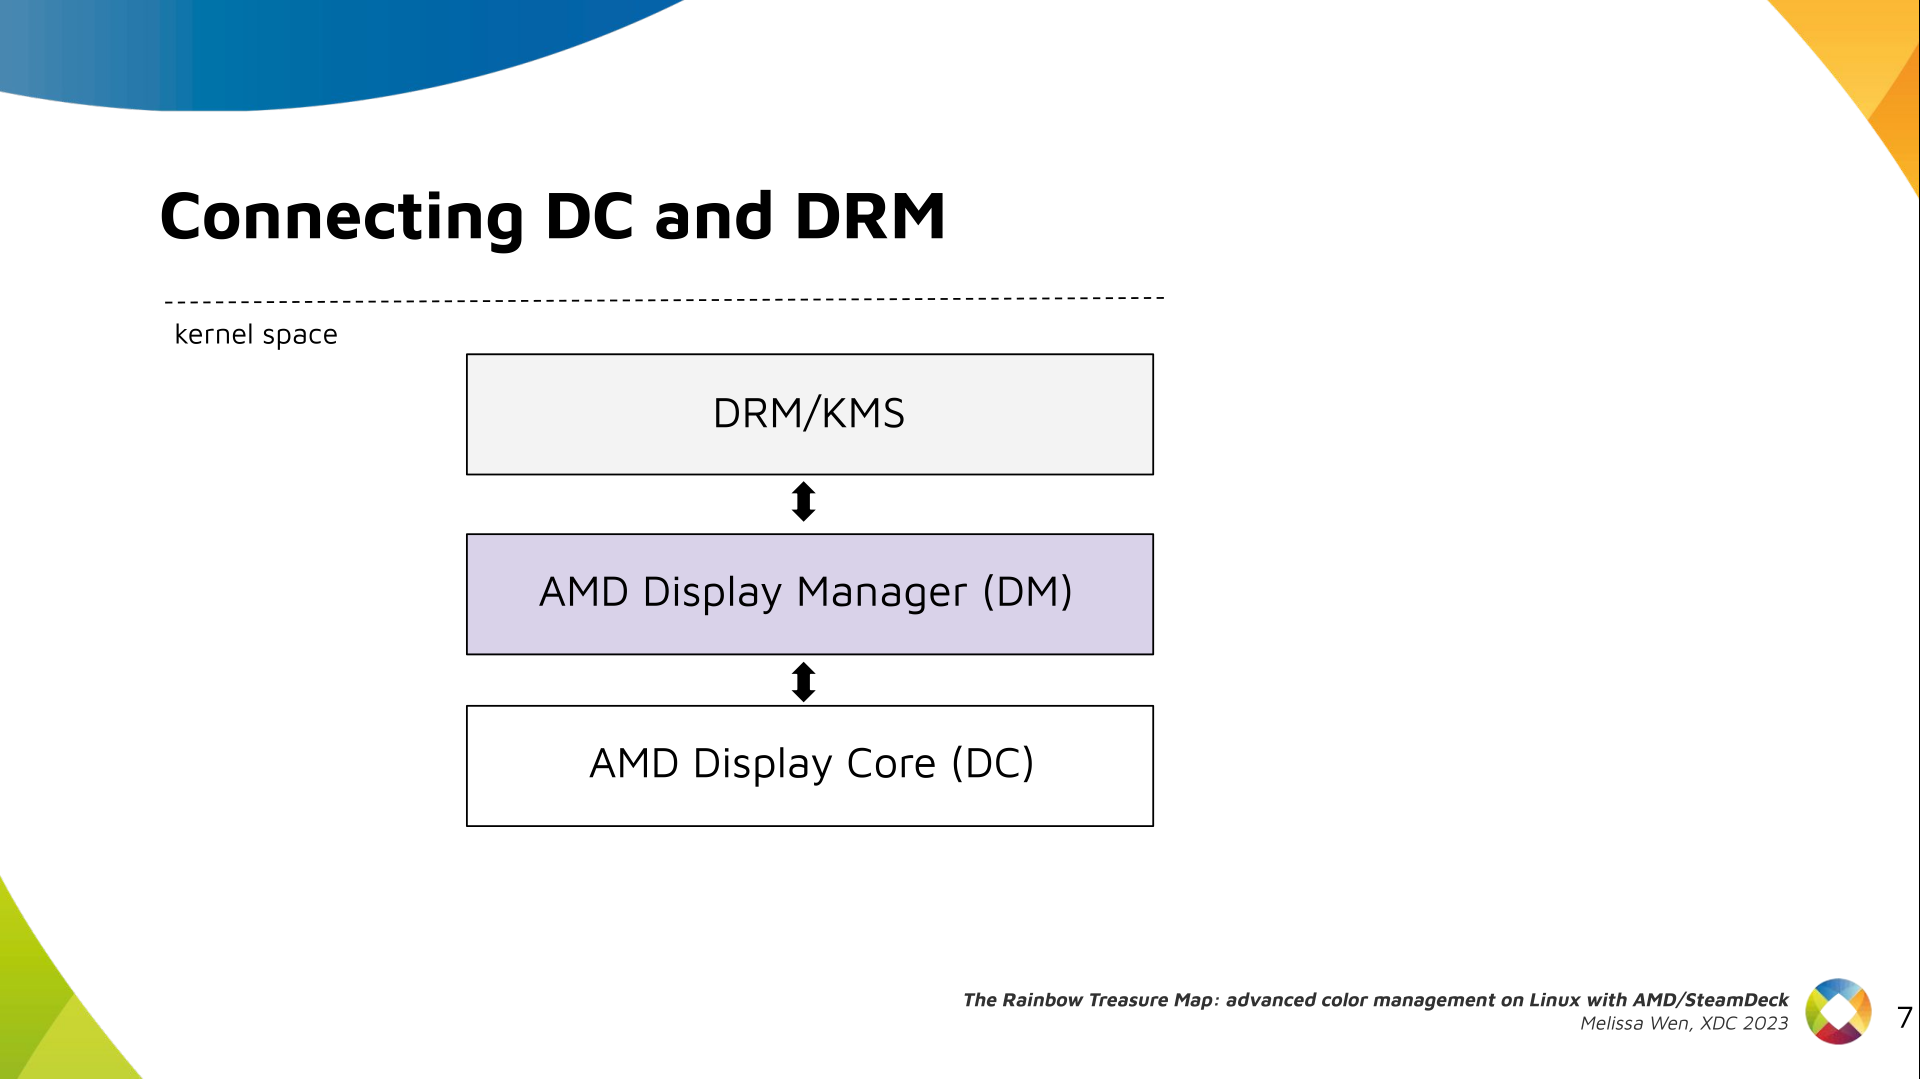 Slide 7: Three-layers diagram highlighting AMD Display Manager, DM - the layer that connects DC and DRM